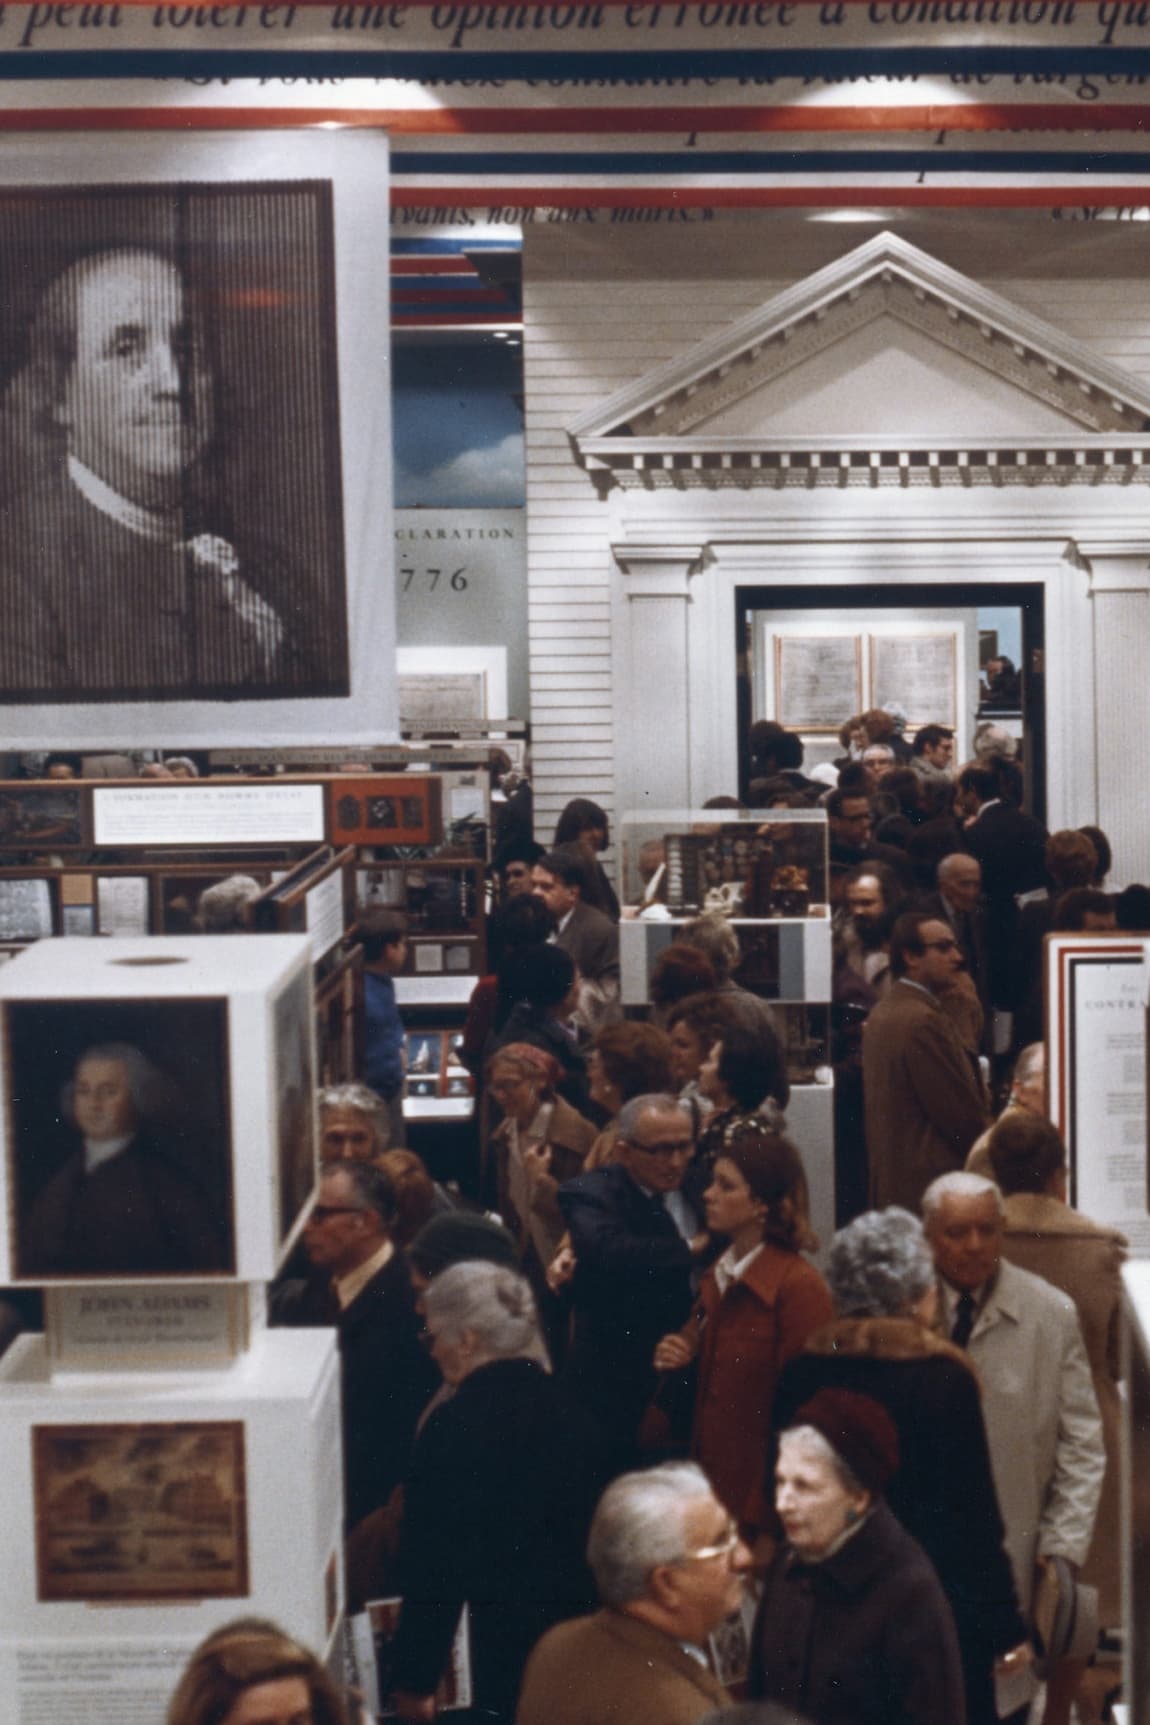 The World of Franklin and Jefferson: The Opening Of An Exhibition